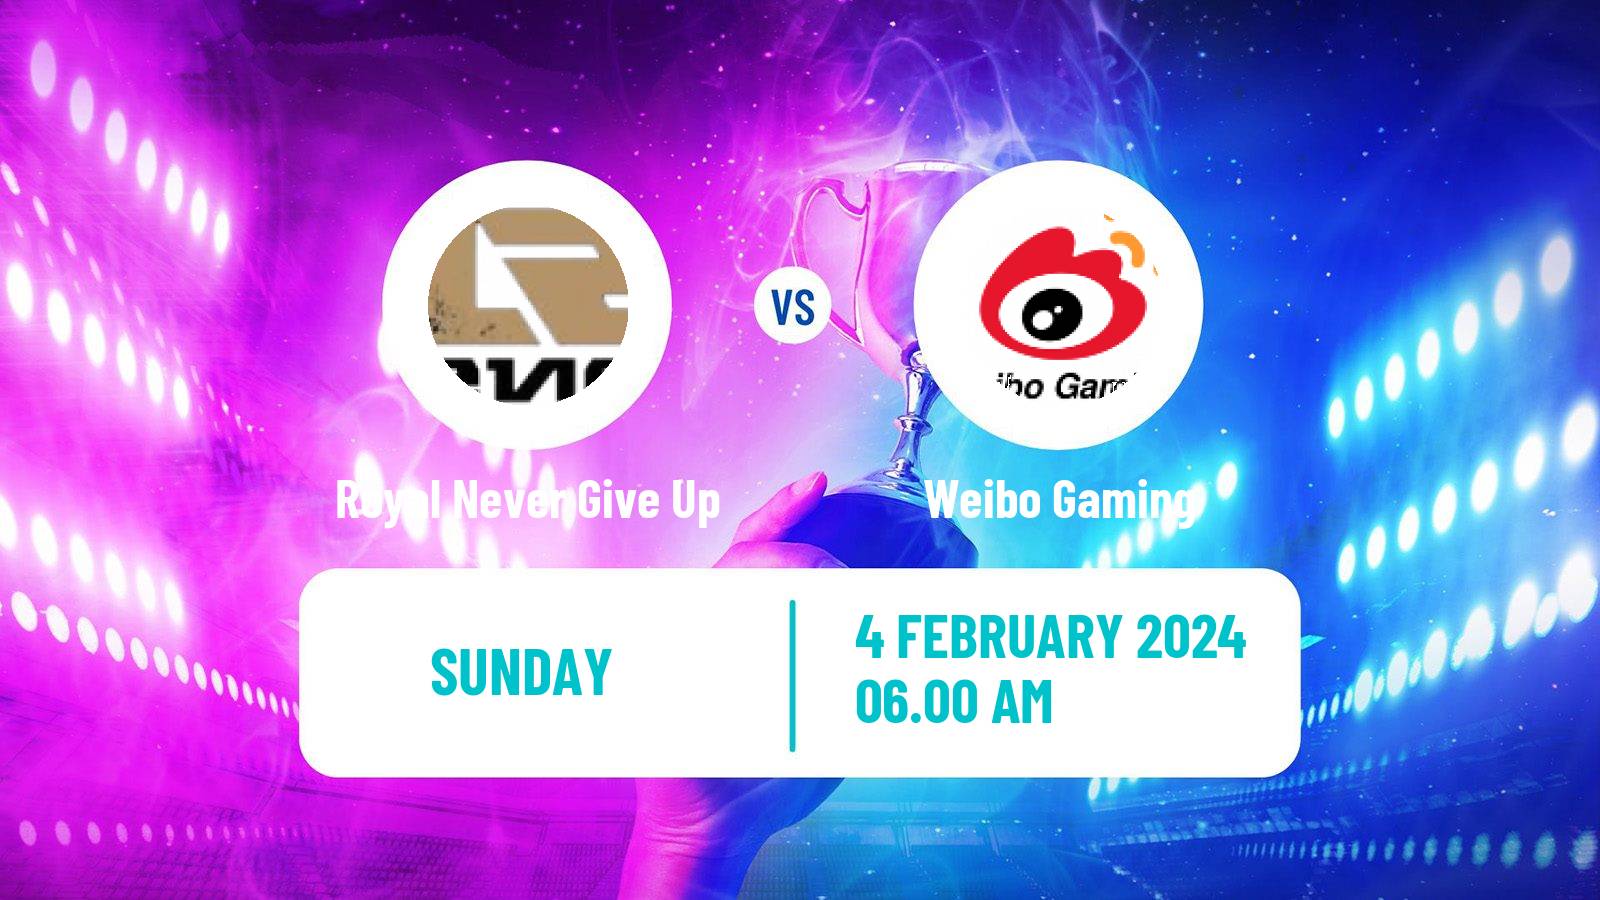 Esports League Of Legends Lpl Royal Never Give Up - Weibo Gaming